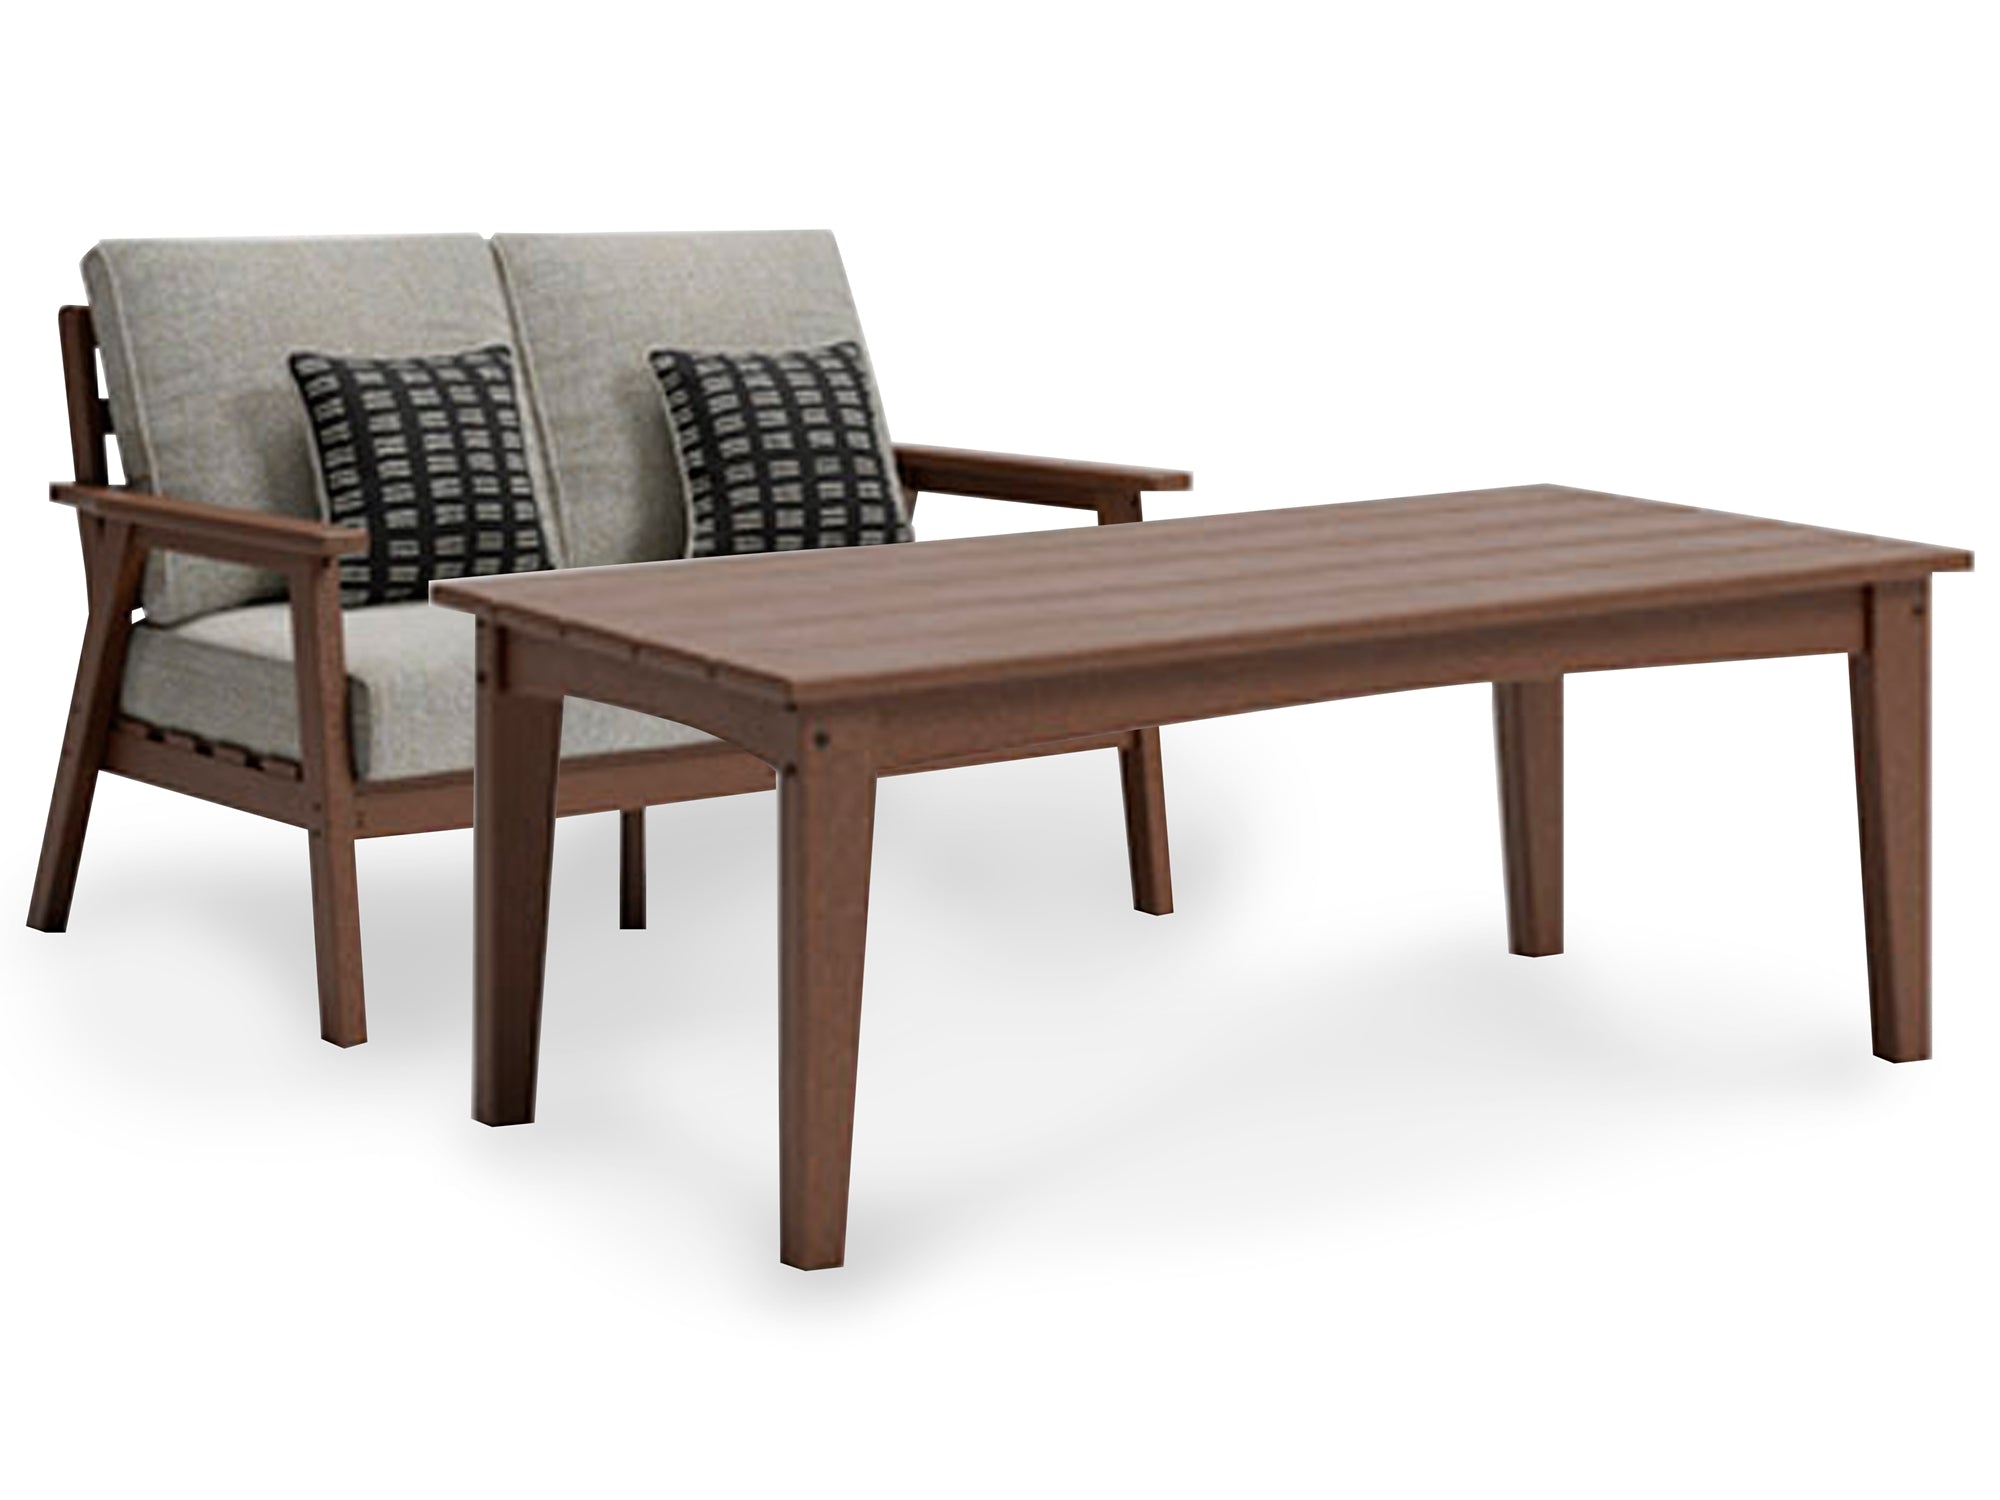 Emmeline Outdoor Loveseat with Coffee Table